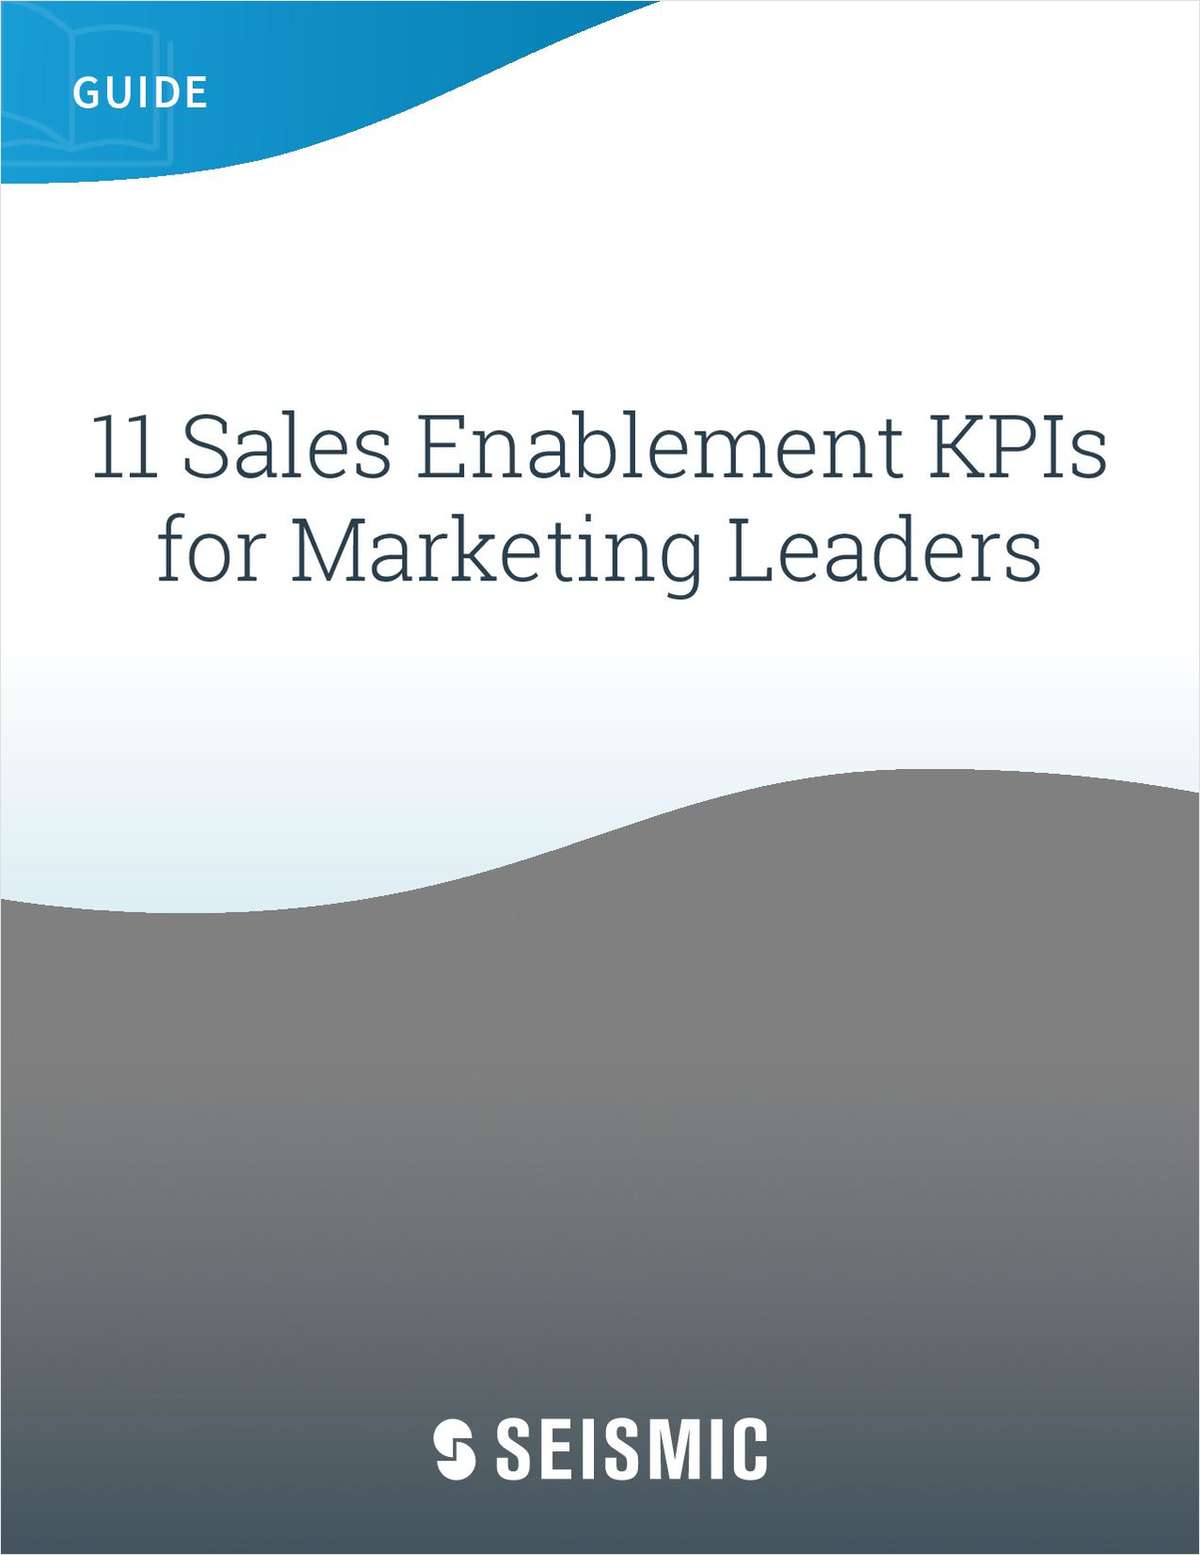 11 Sales Enablement KPIs for Marketing Leaders